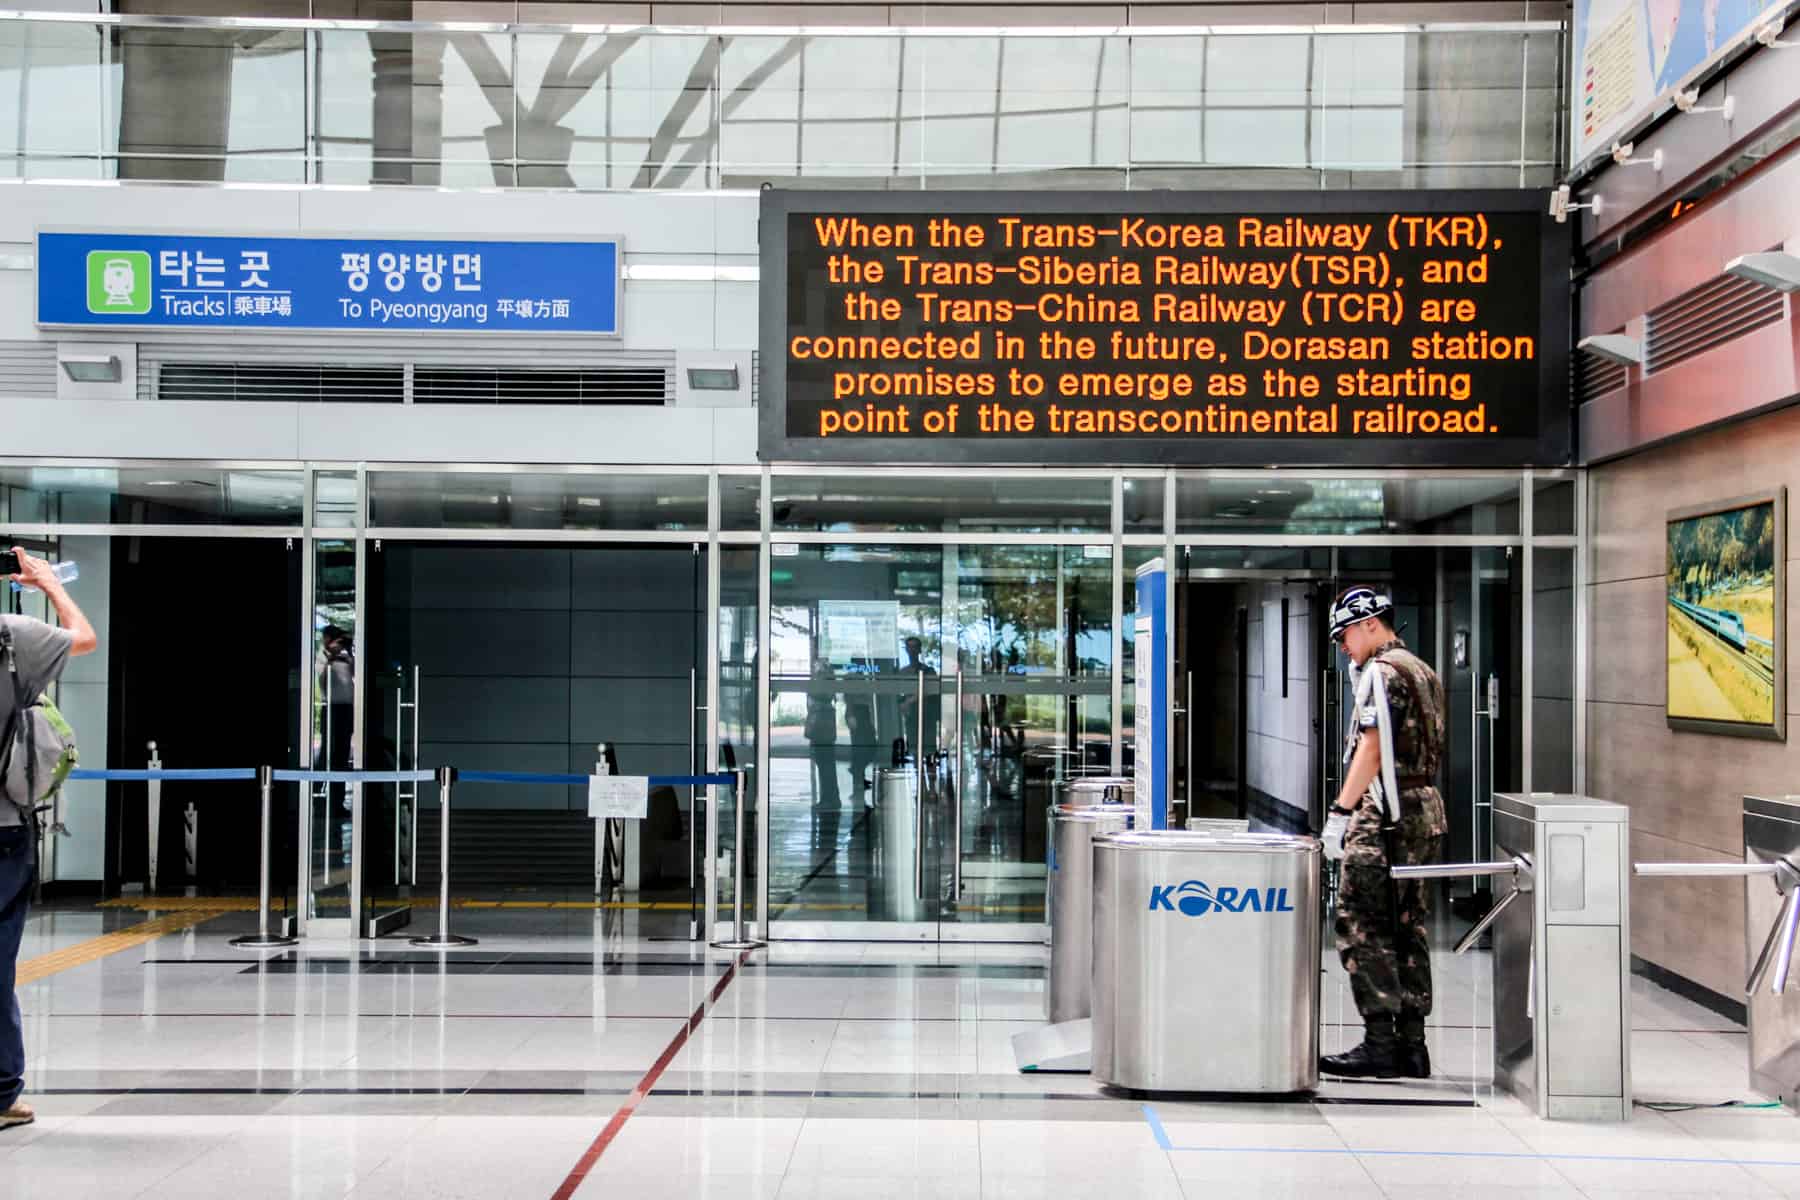 A South Korean military guard at the entrance barrier at Dorasan Train Station, seen on a DMZ tour. A blue sign signals the direction to Pyeongyang (the capital of North Korea) and a black sign has orange text reading "When the Trans-Korea Railway (TKR), the Trans-Siberia Railway (TSR), and the Trans-China Railway (TCR) are connected in the future, Dorasan station promise to emerge as the starting point of the transcontinental railroad. 